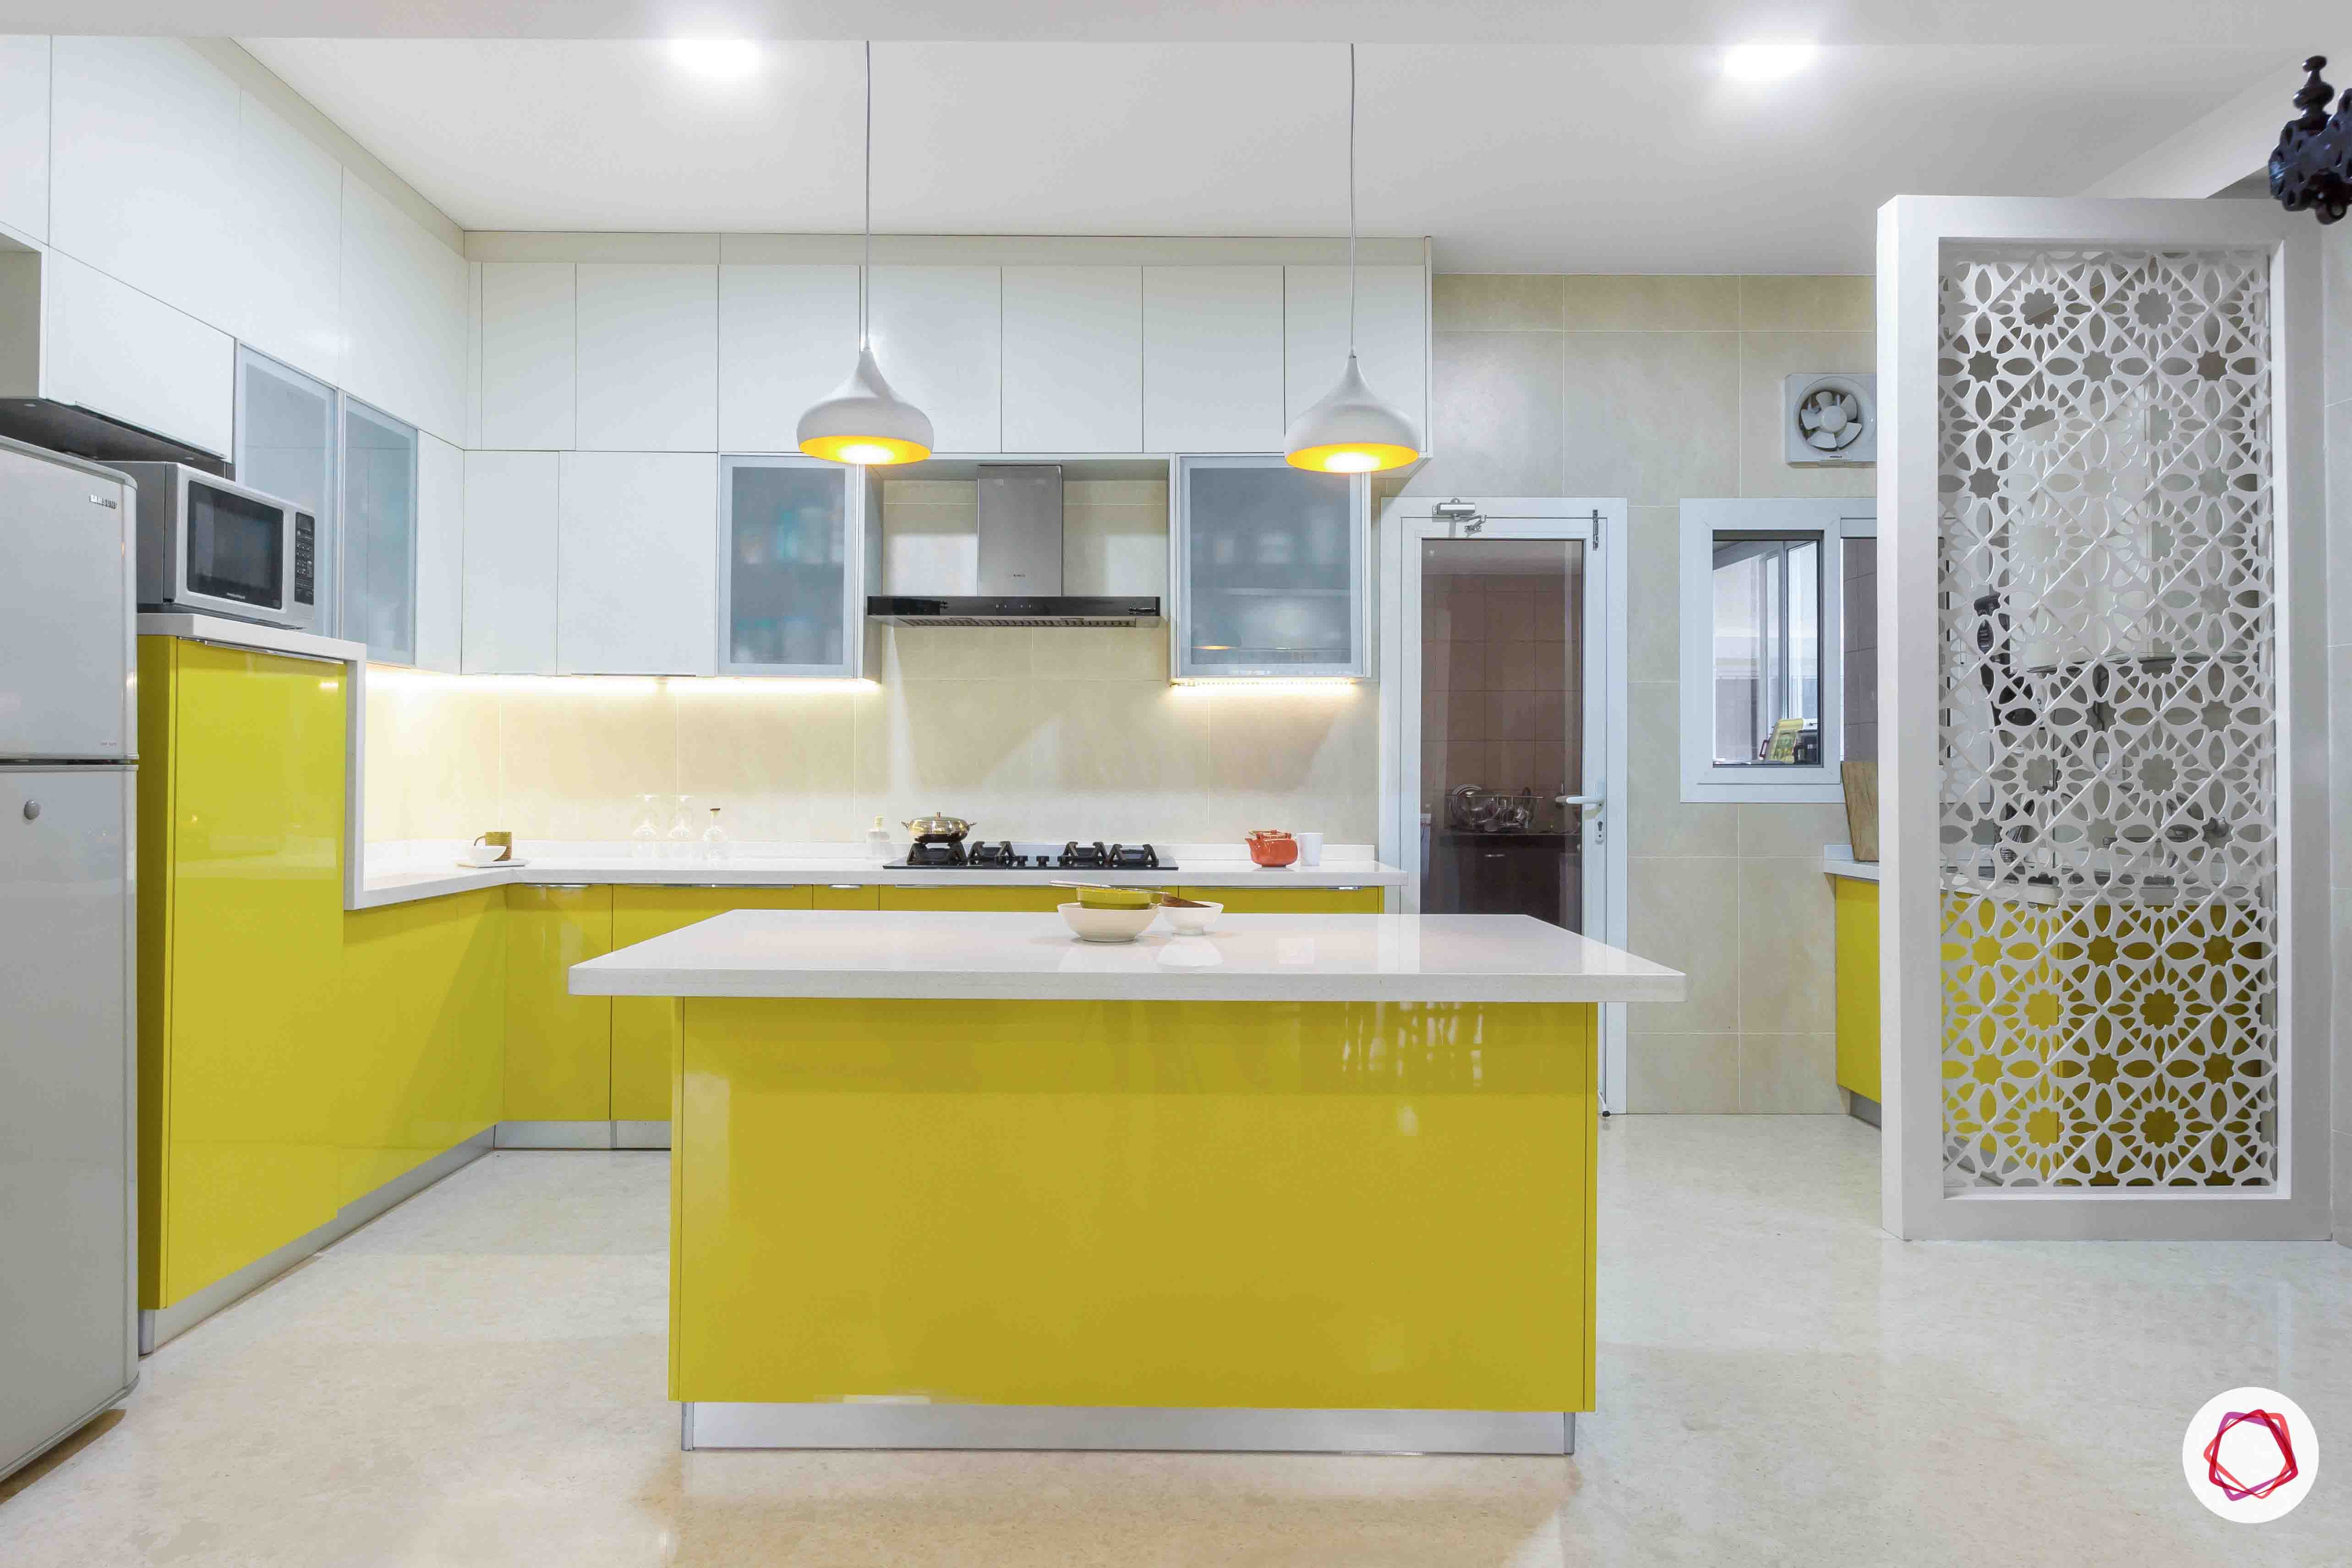 kitchen-for-elderly-yellow-cabinets